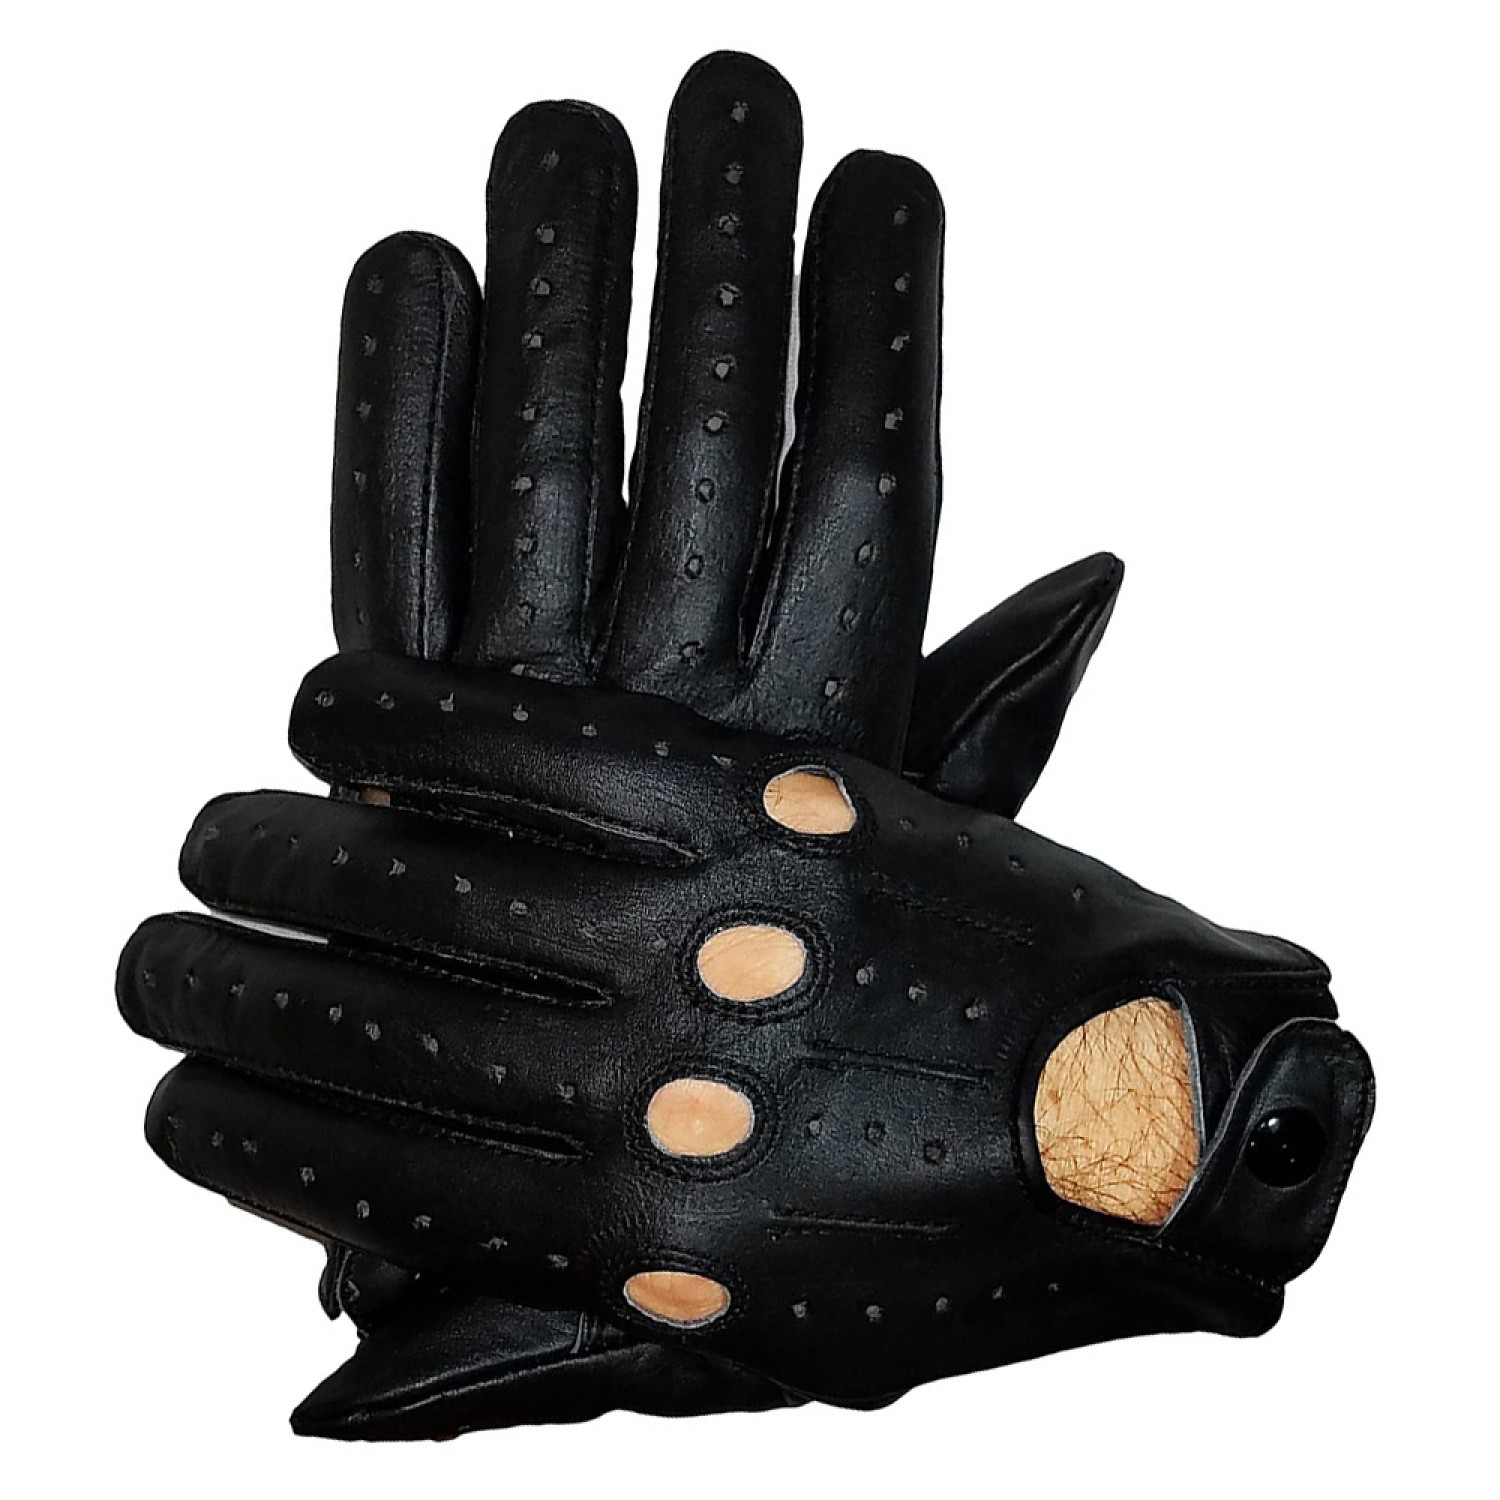 2022  Best selling Black gloves high quality leather gloves